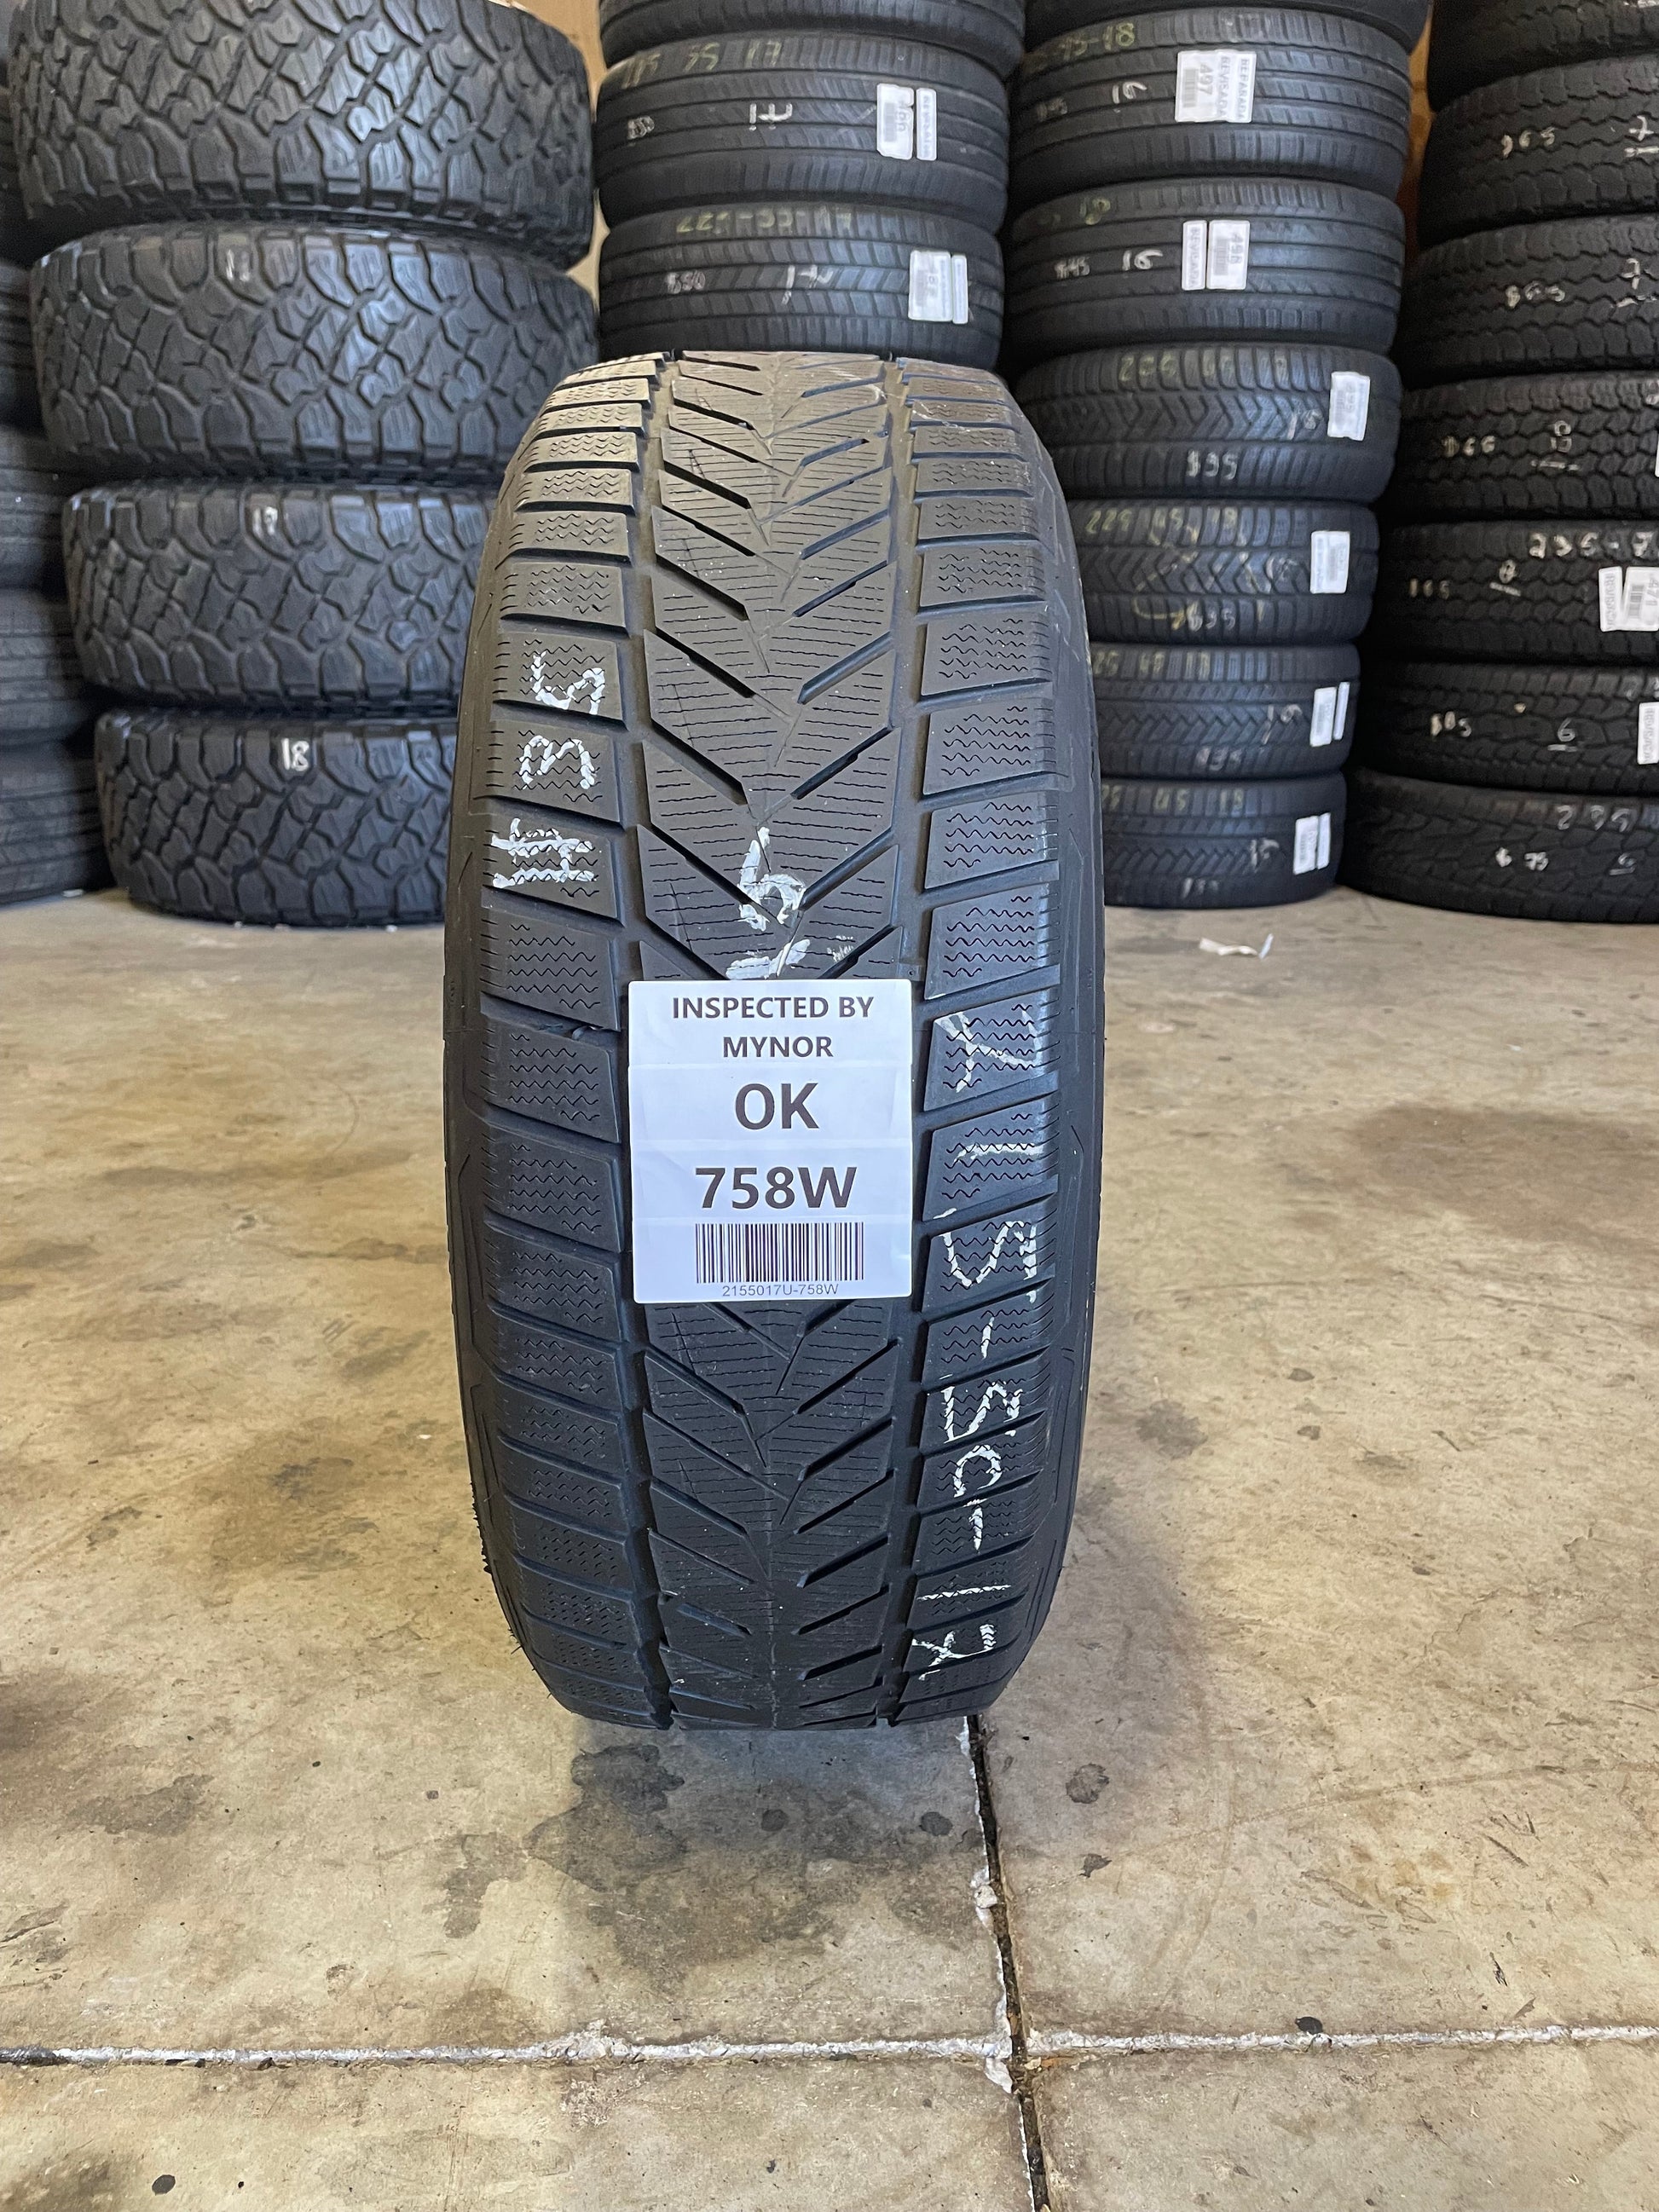 SINGLE 215/50R17 Vredestein Wintrac Xtreme 5 95 V XL - Used Tires